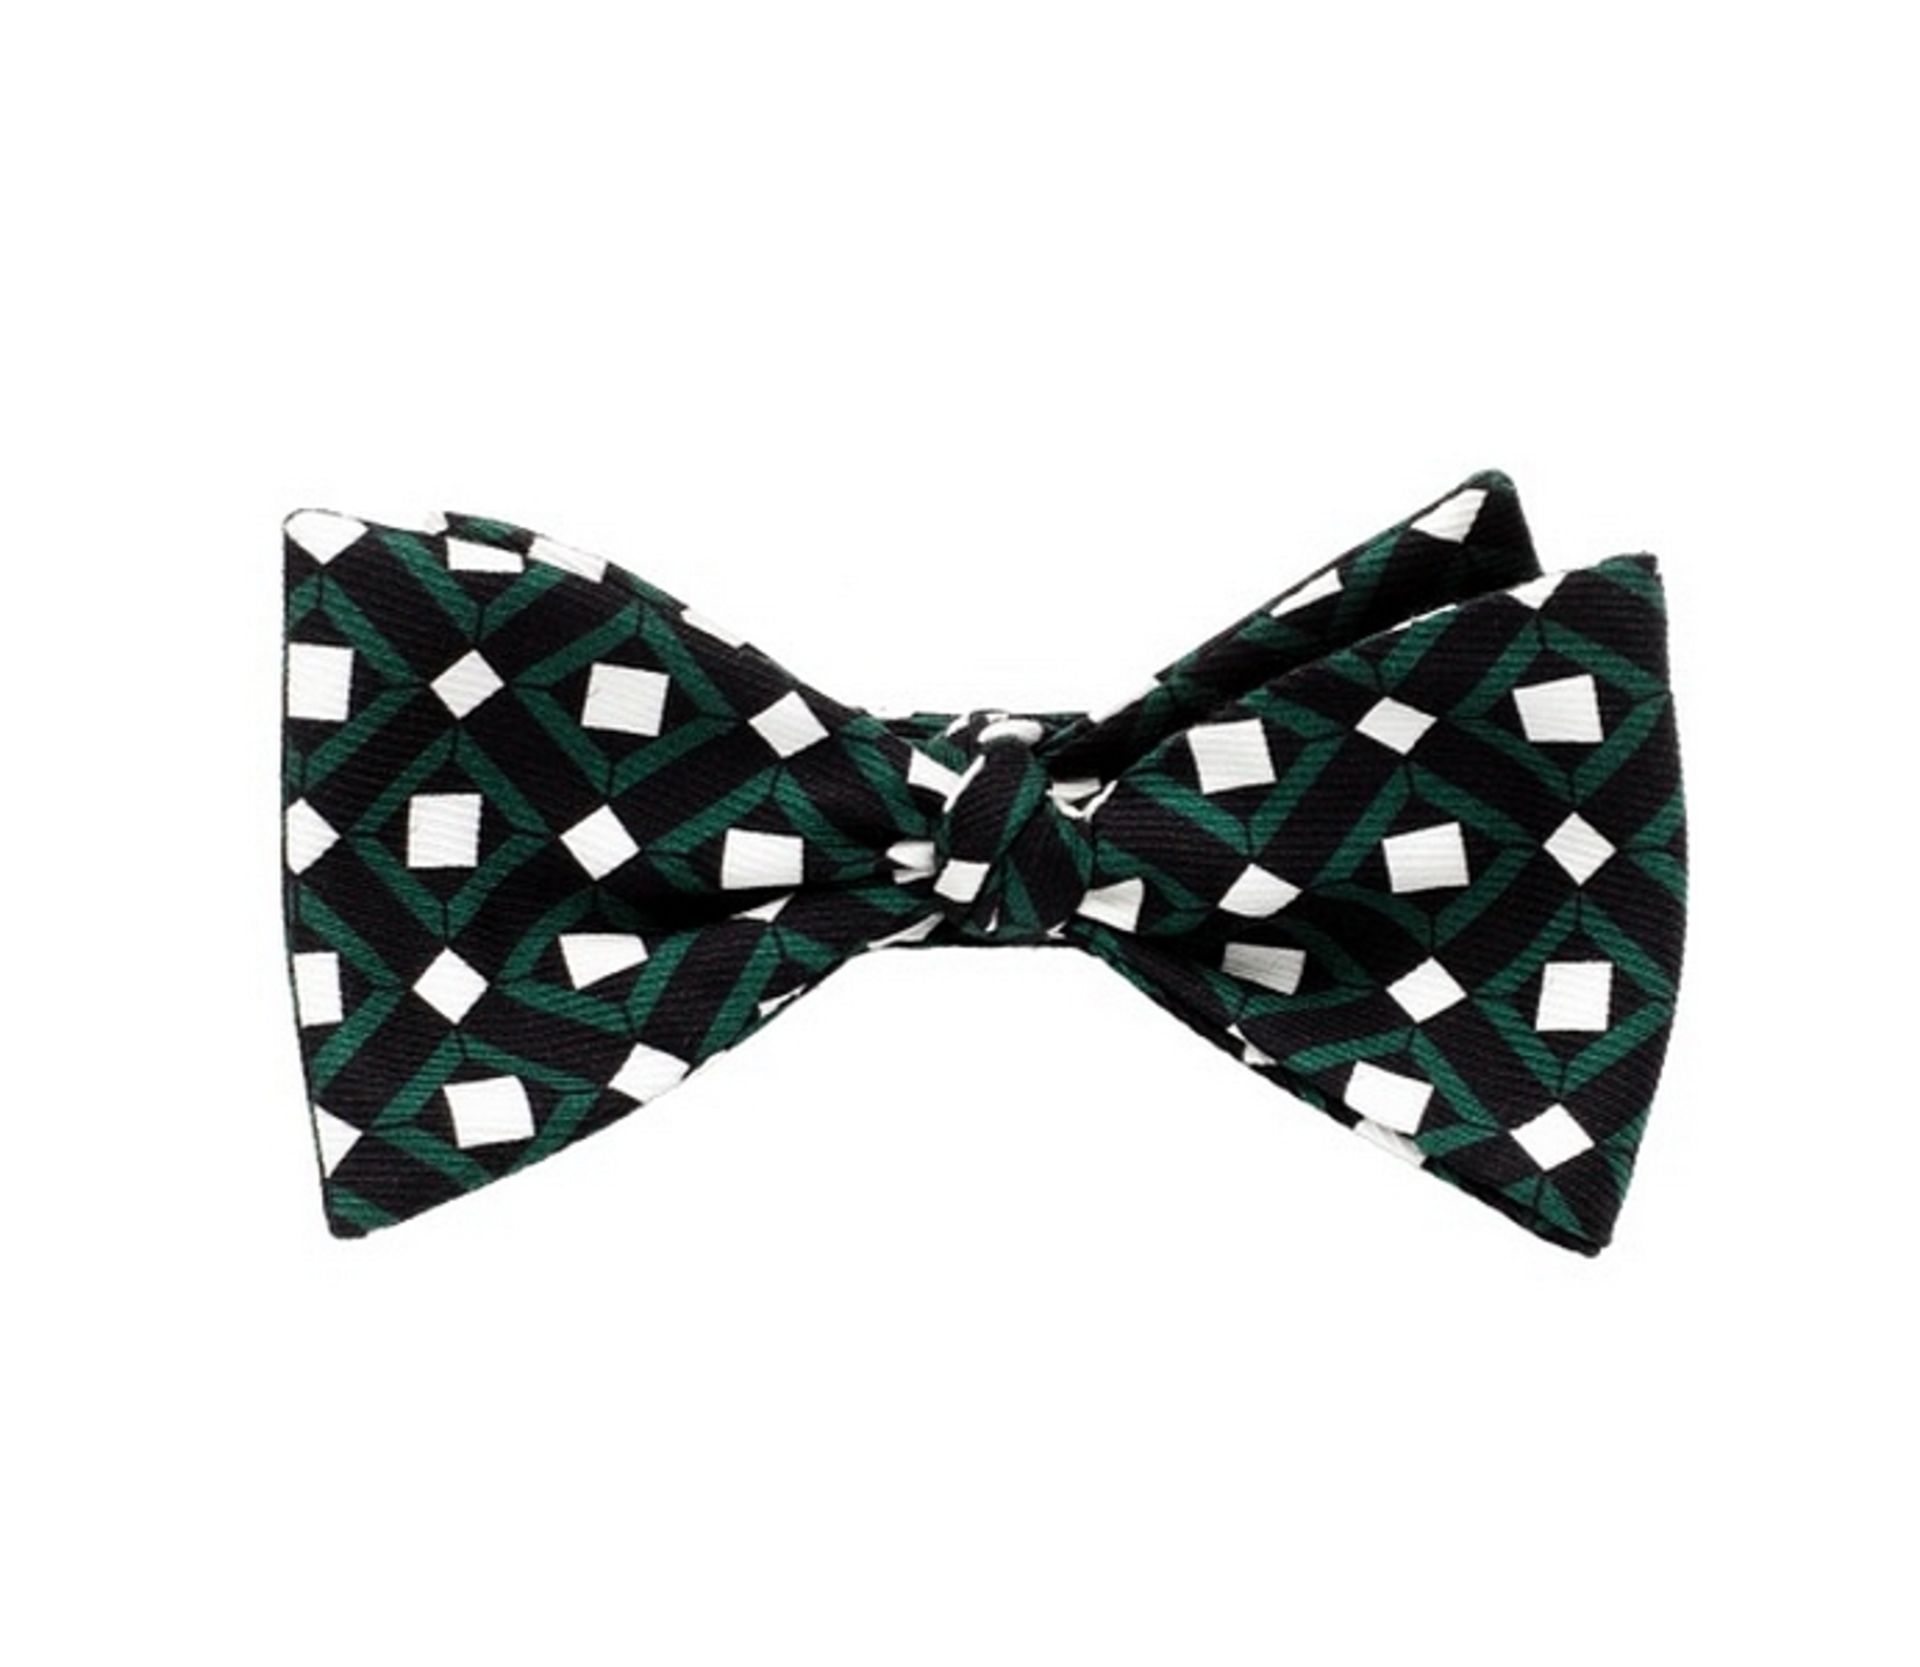 BRING BACK TIME MOSAIC BOW TIE BRING BACK TIME RRP £65.00 Mark / Giusti knows that a sleek looking